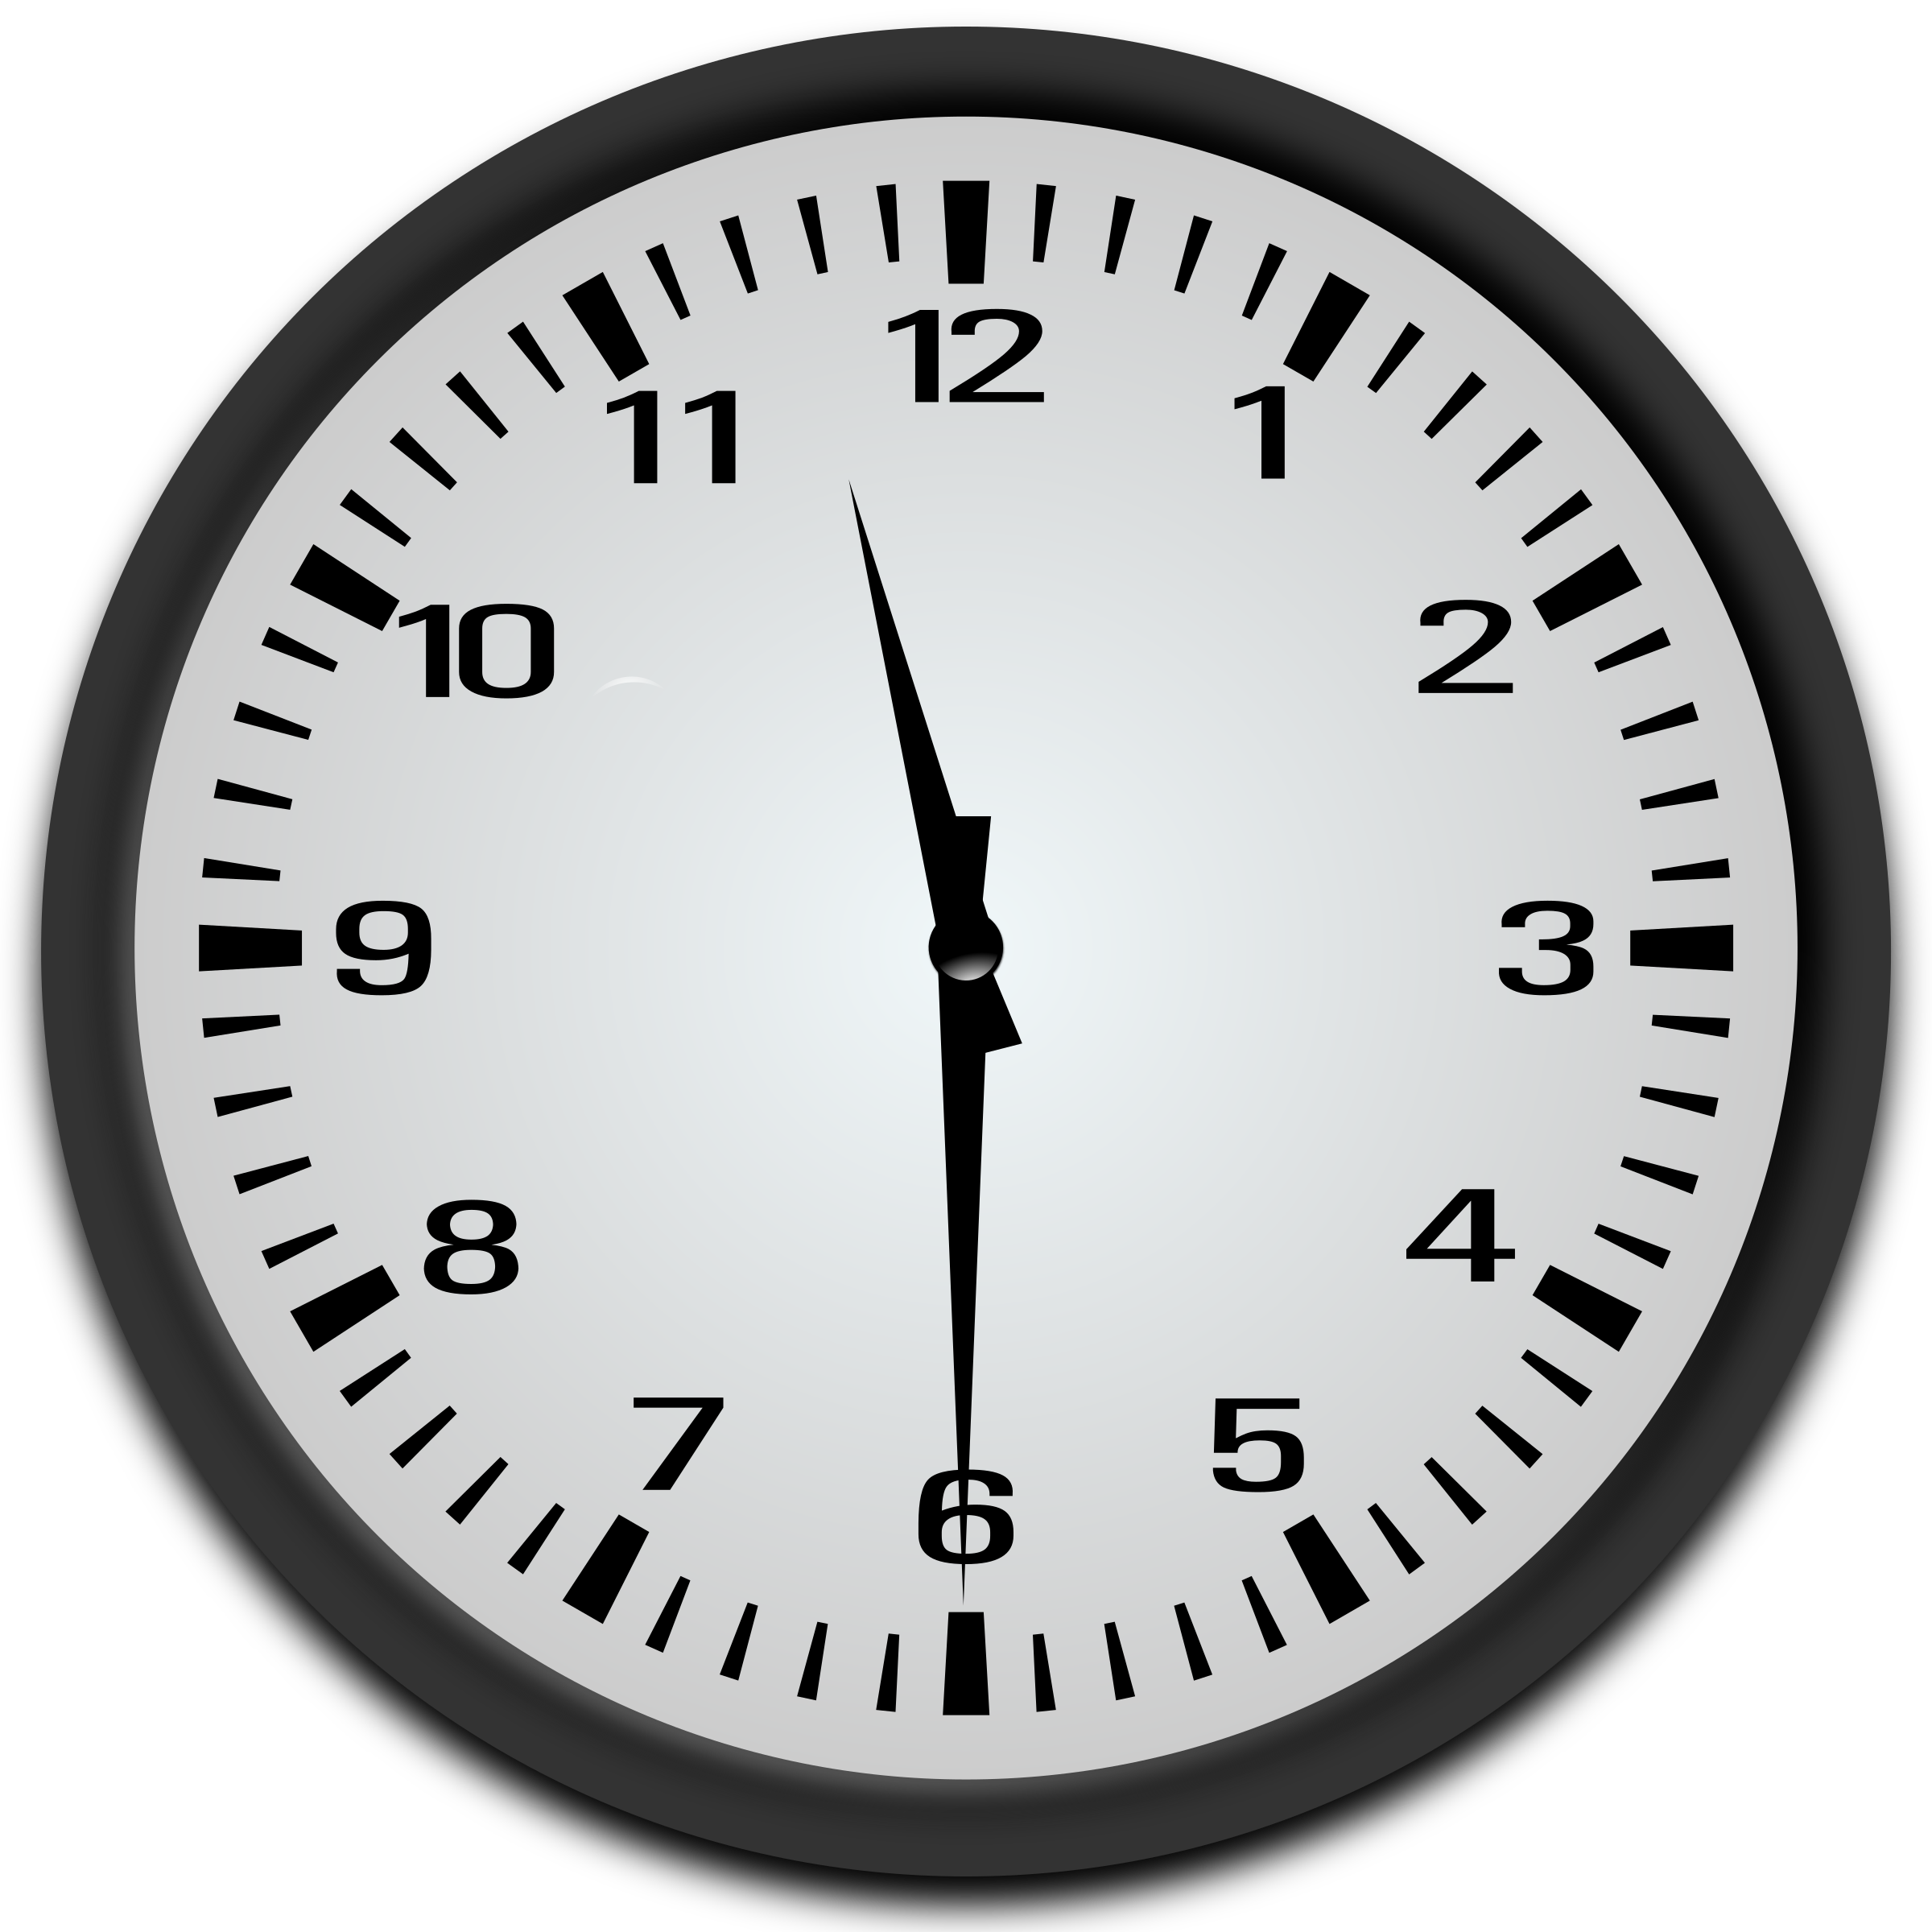 Clock Face Showing Half Past